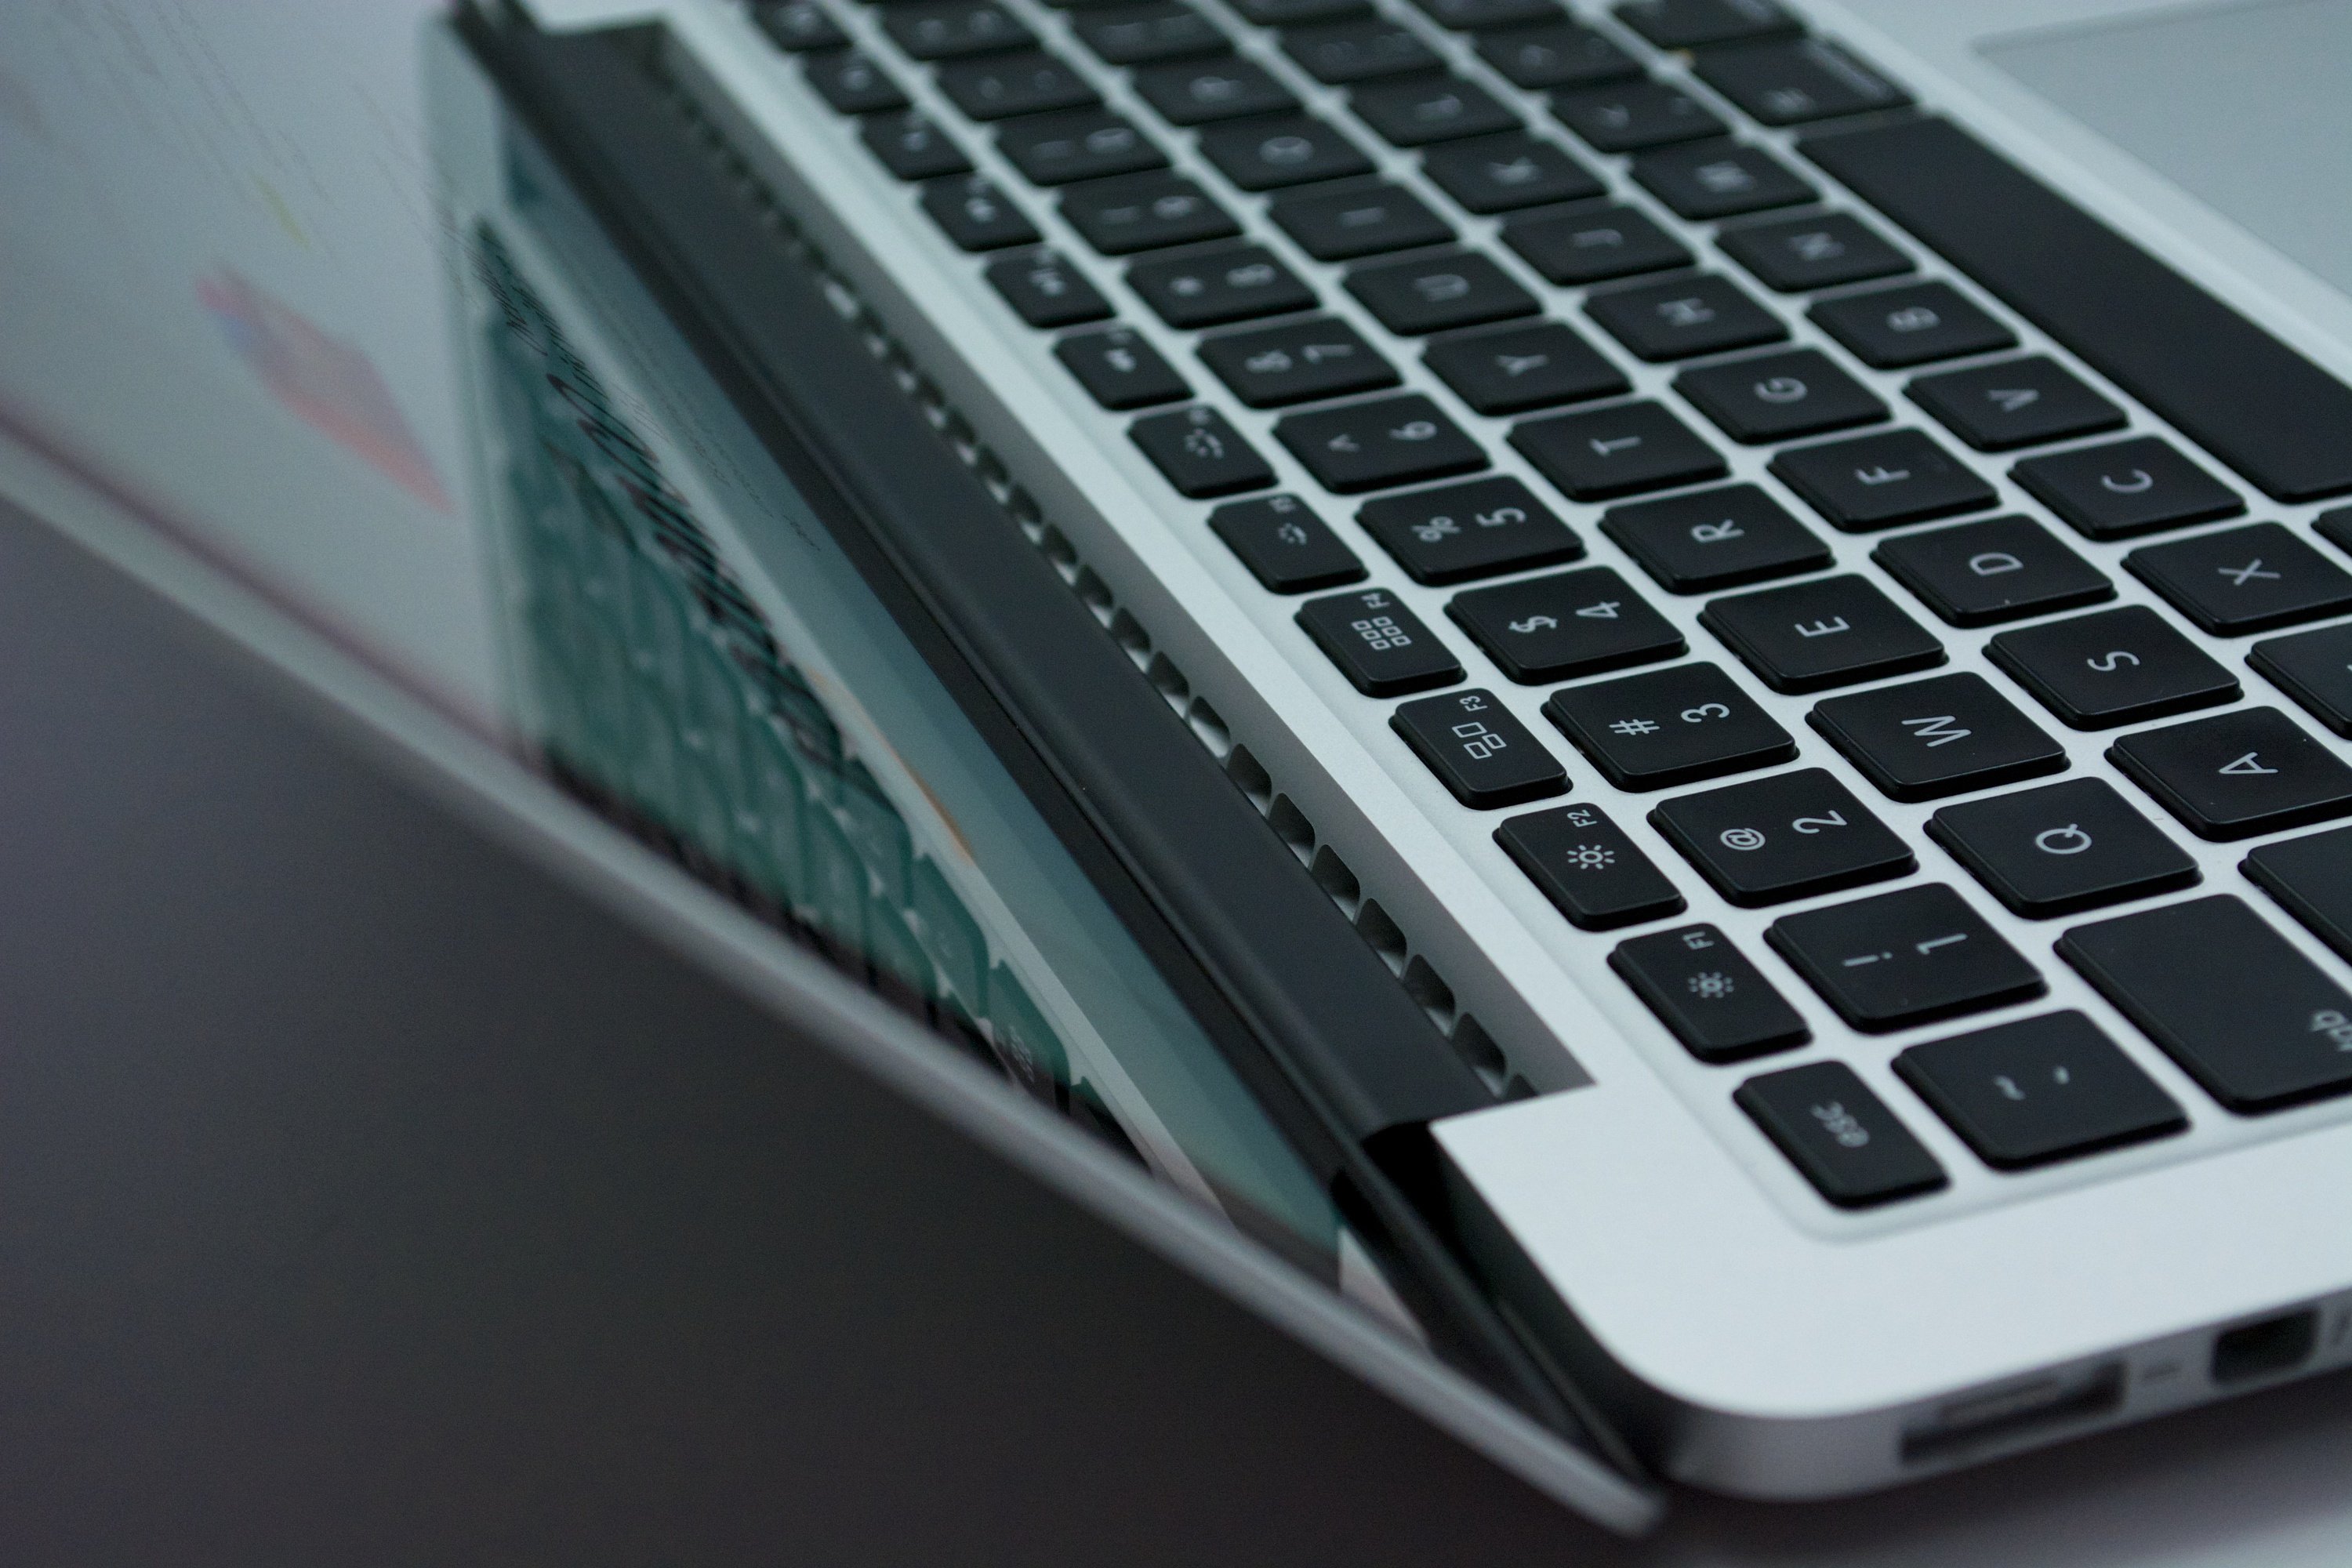 Expect a small spec boost and more RAM in the 2014 MacBook Pro Retina.